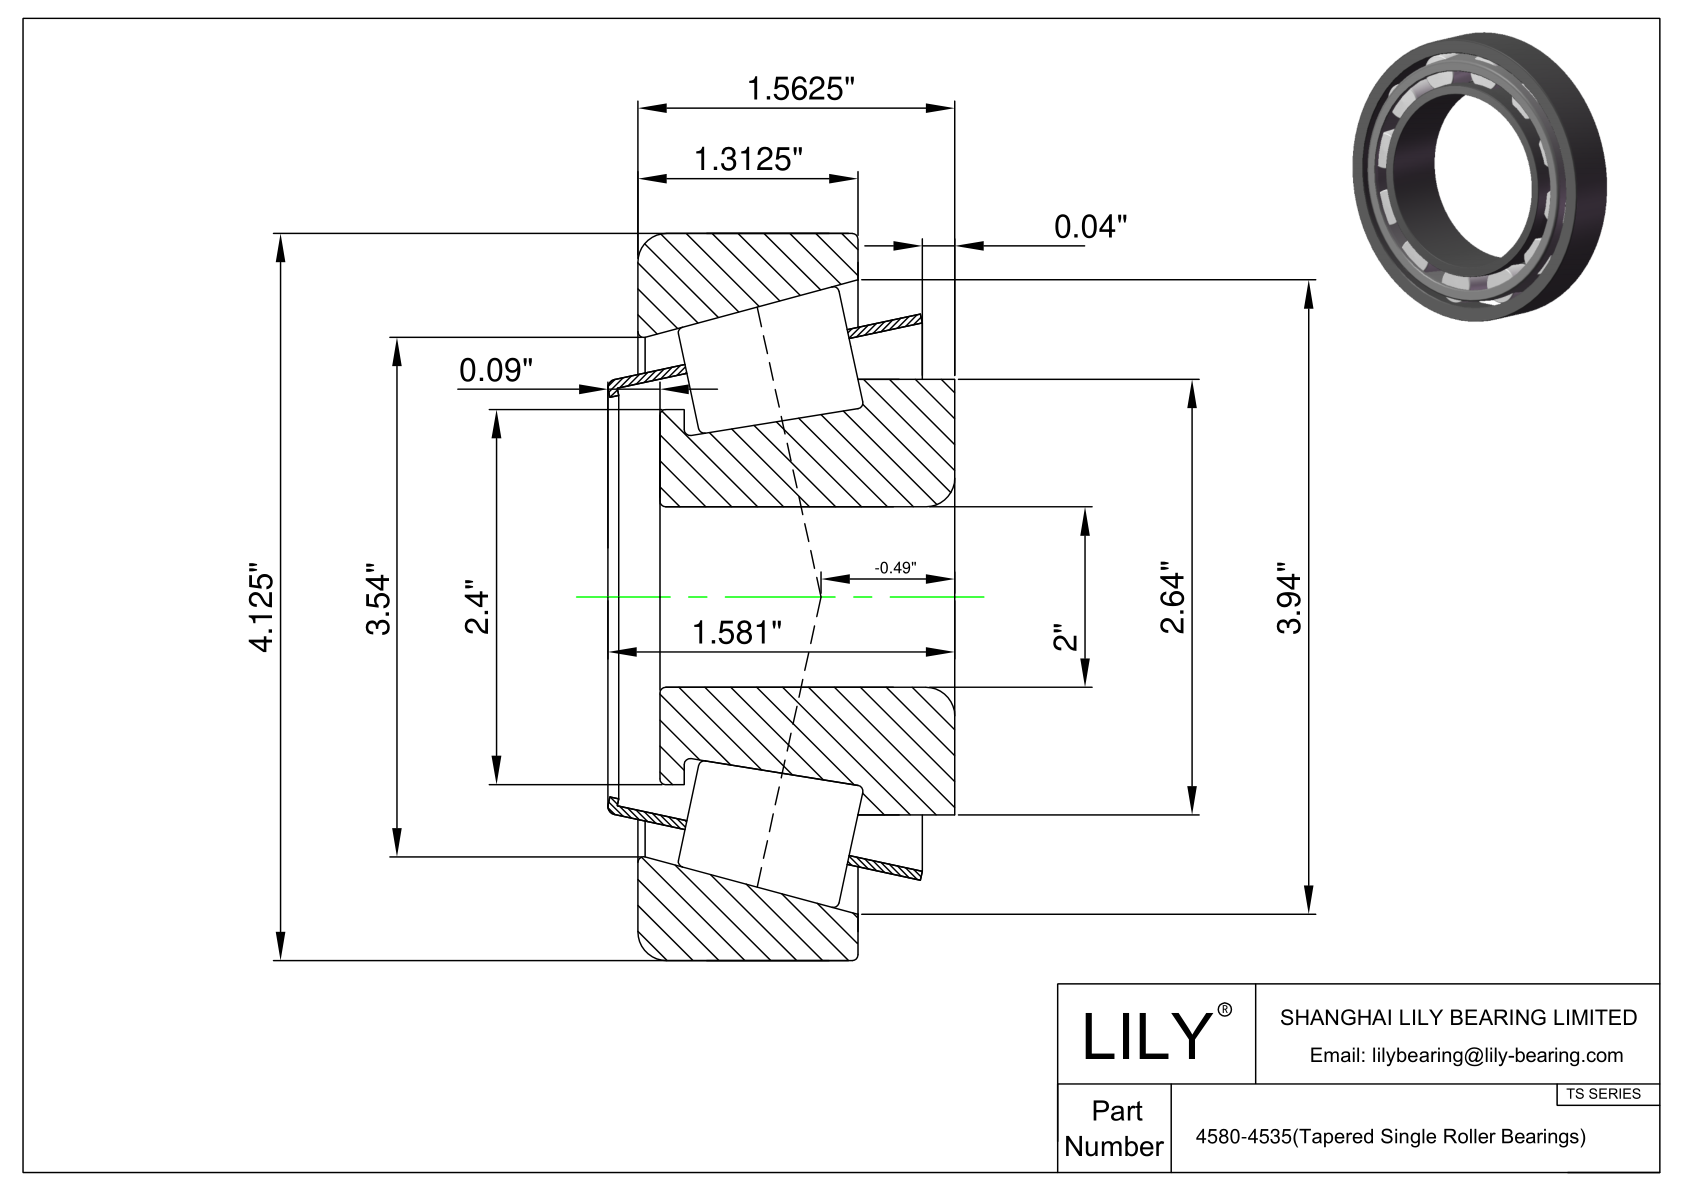 4580-4535 TS (Tapered Single Roller Bearings) (Imperial) cad drawing